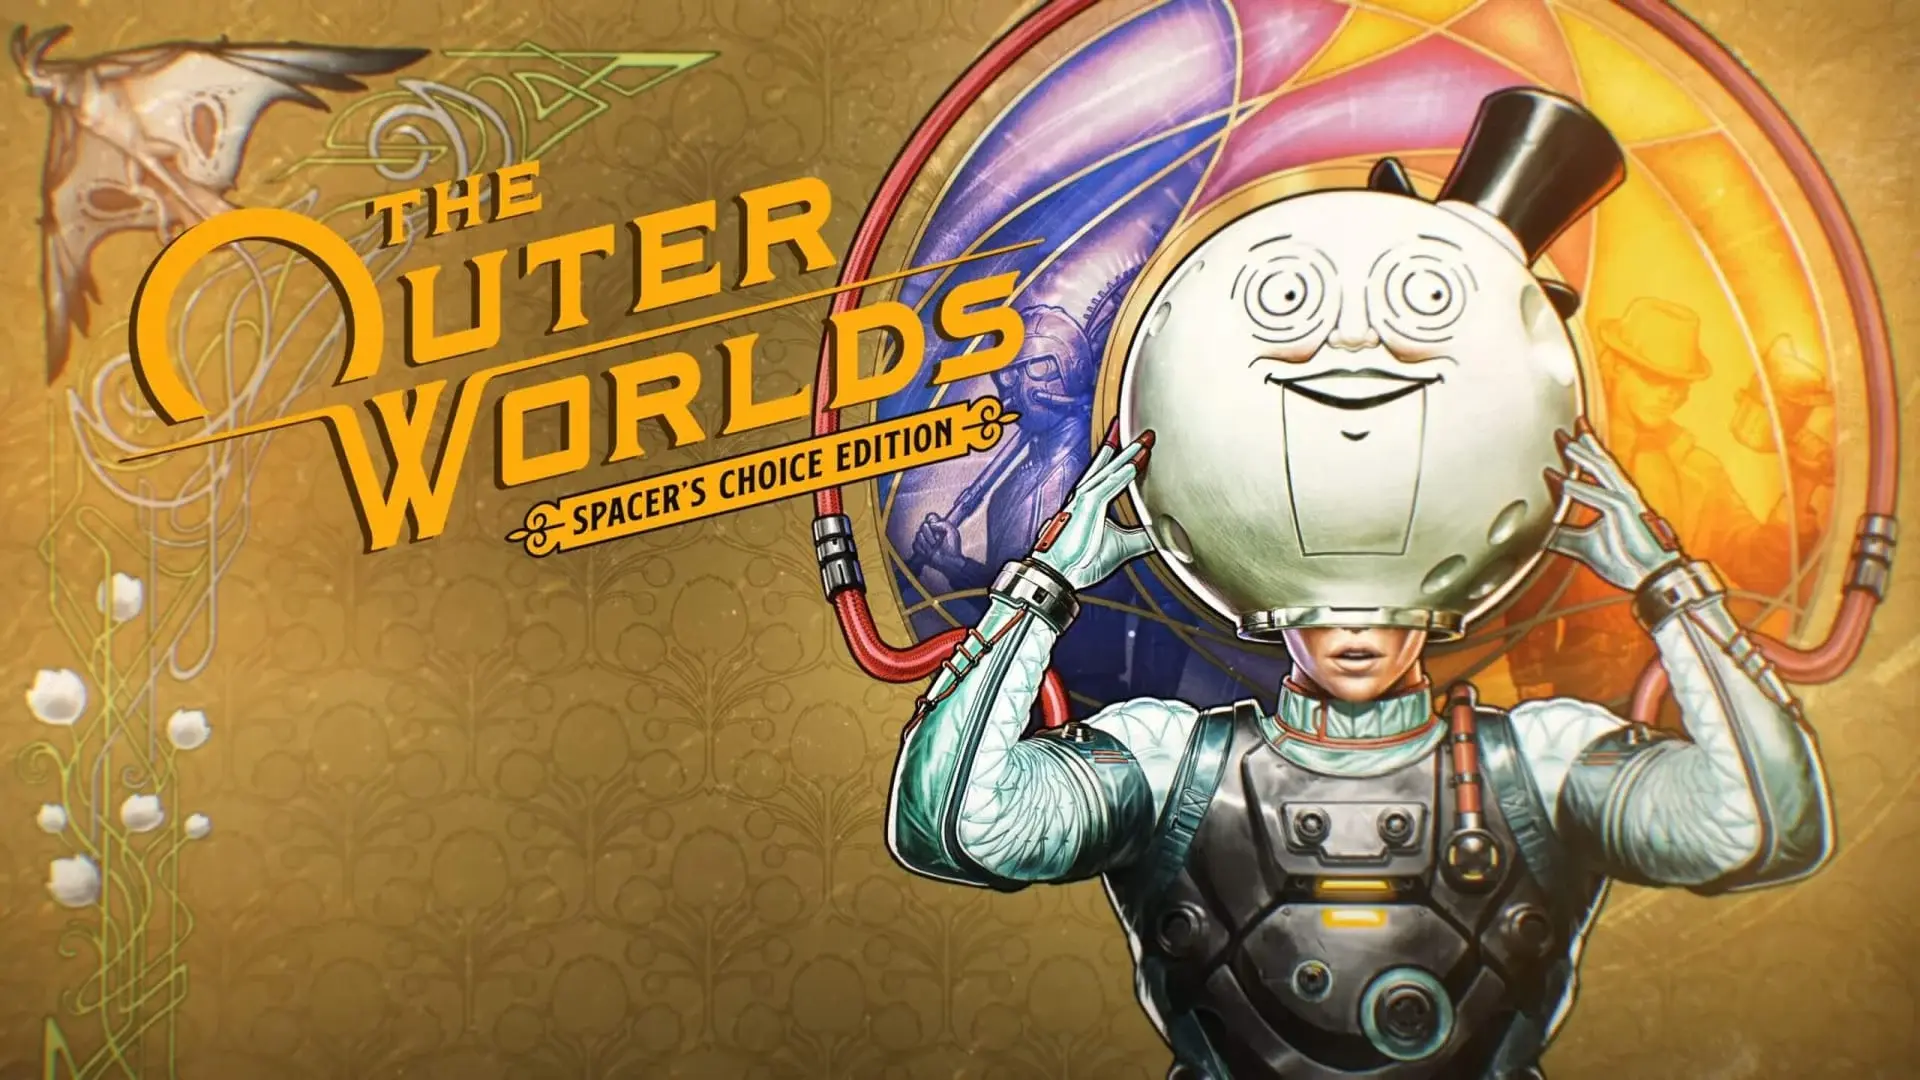 The Outer Worlds Spacer's Choice Edition Announcement Header-658ac431946d8.webp